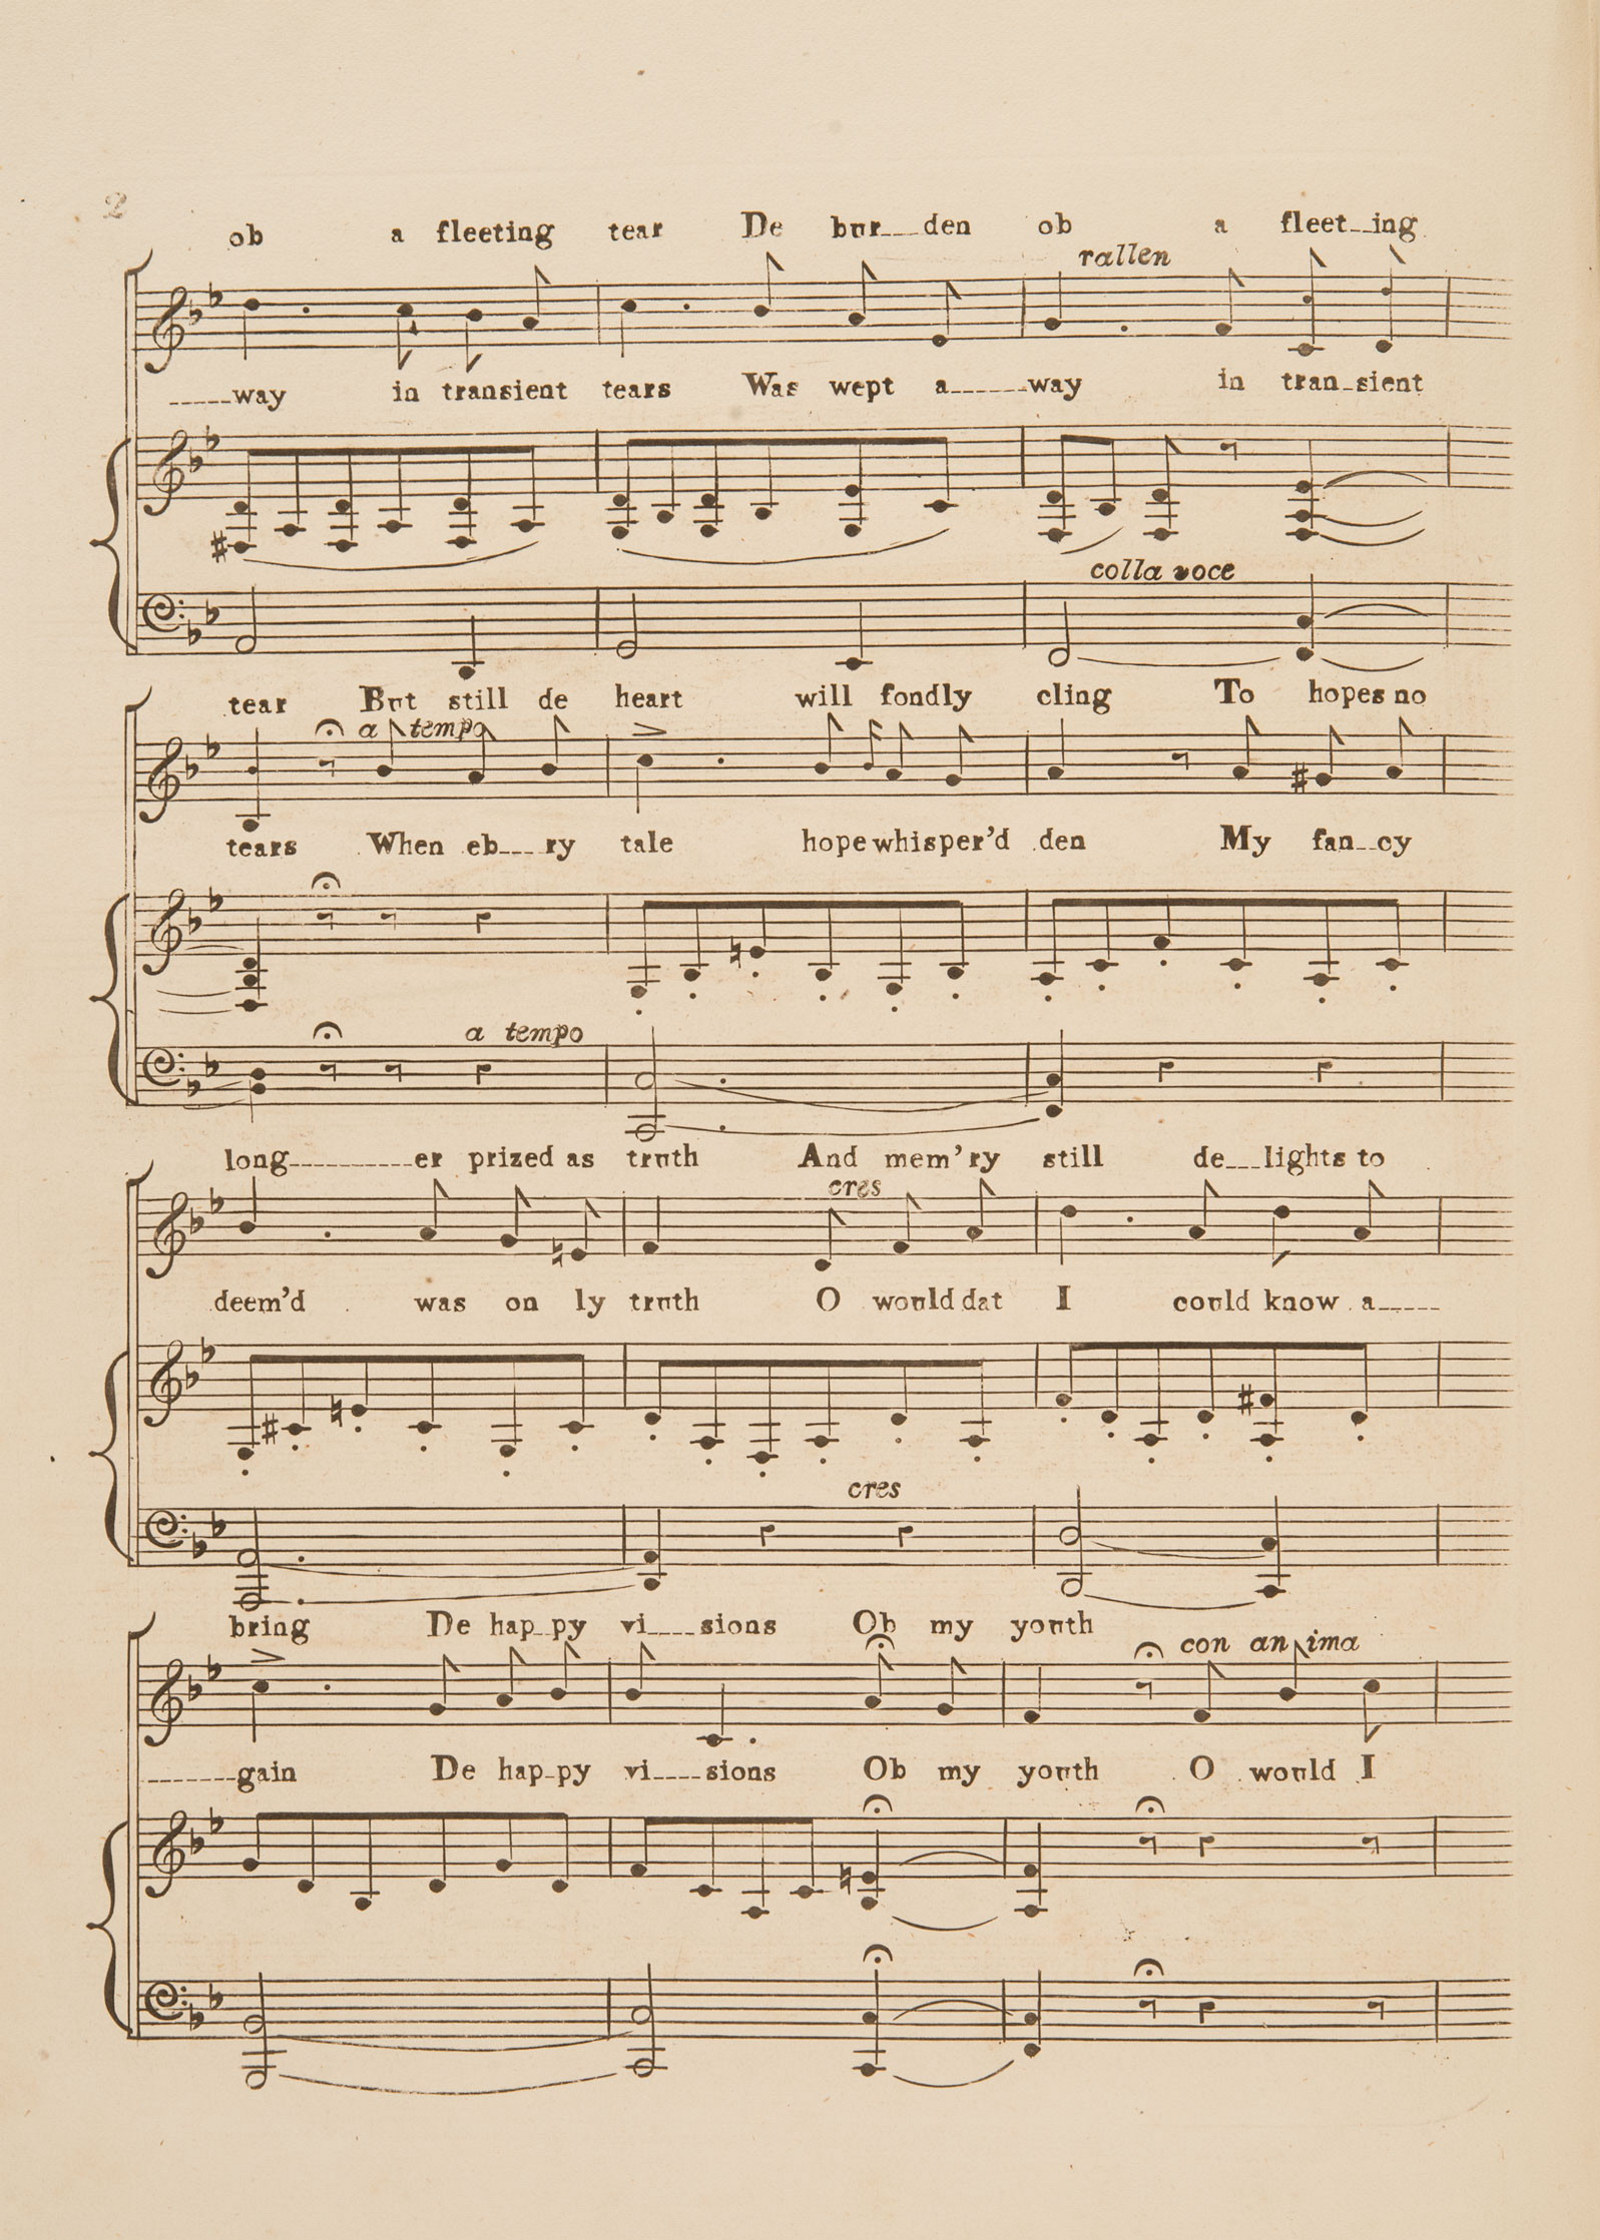 Sheet music, 'O, would I were a Boy again' by Frank Romer, page 2, published circa 1854